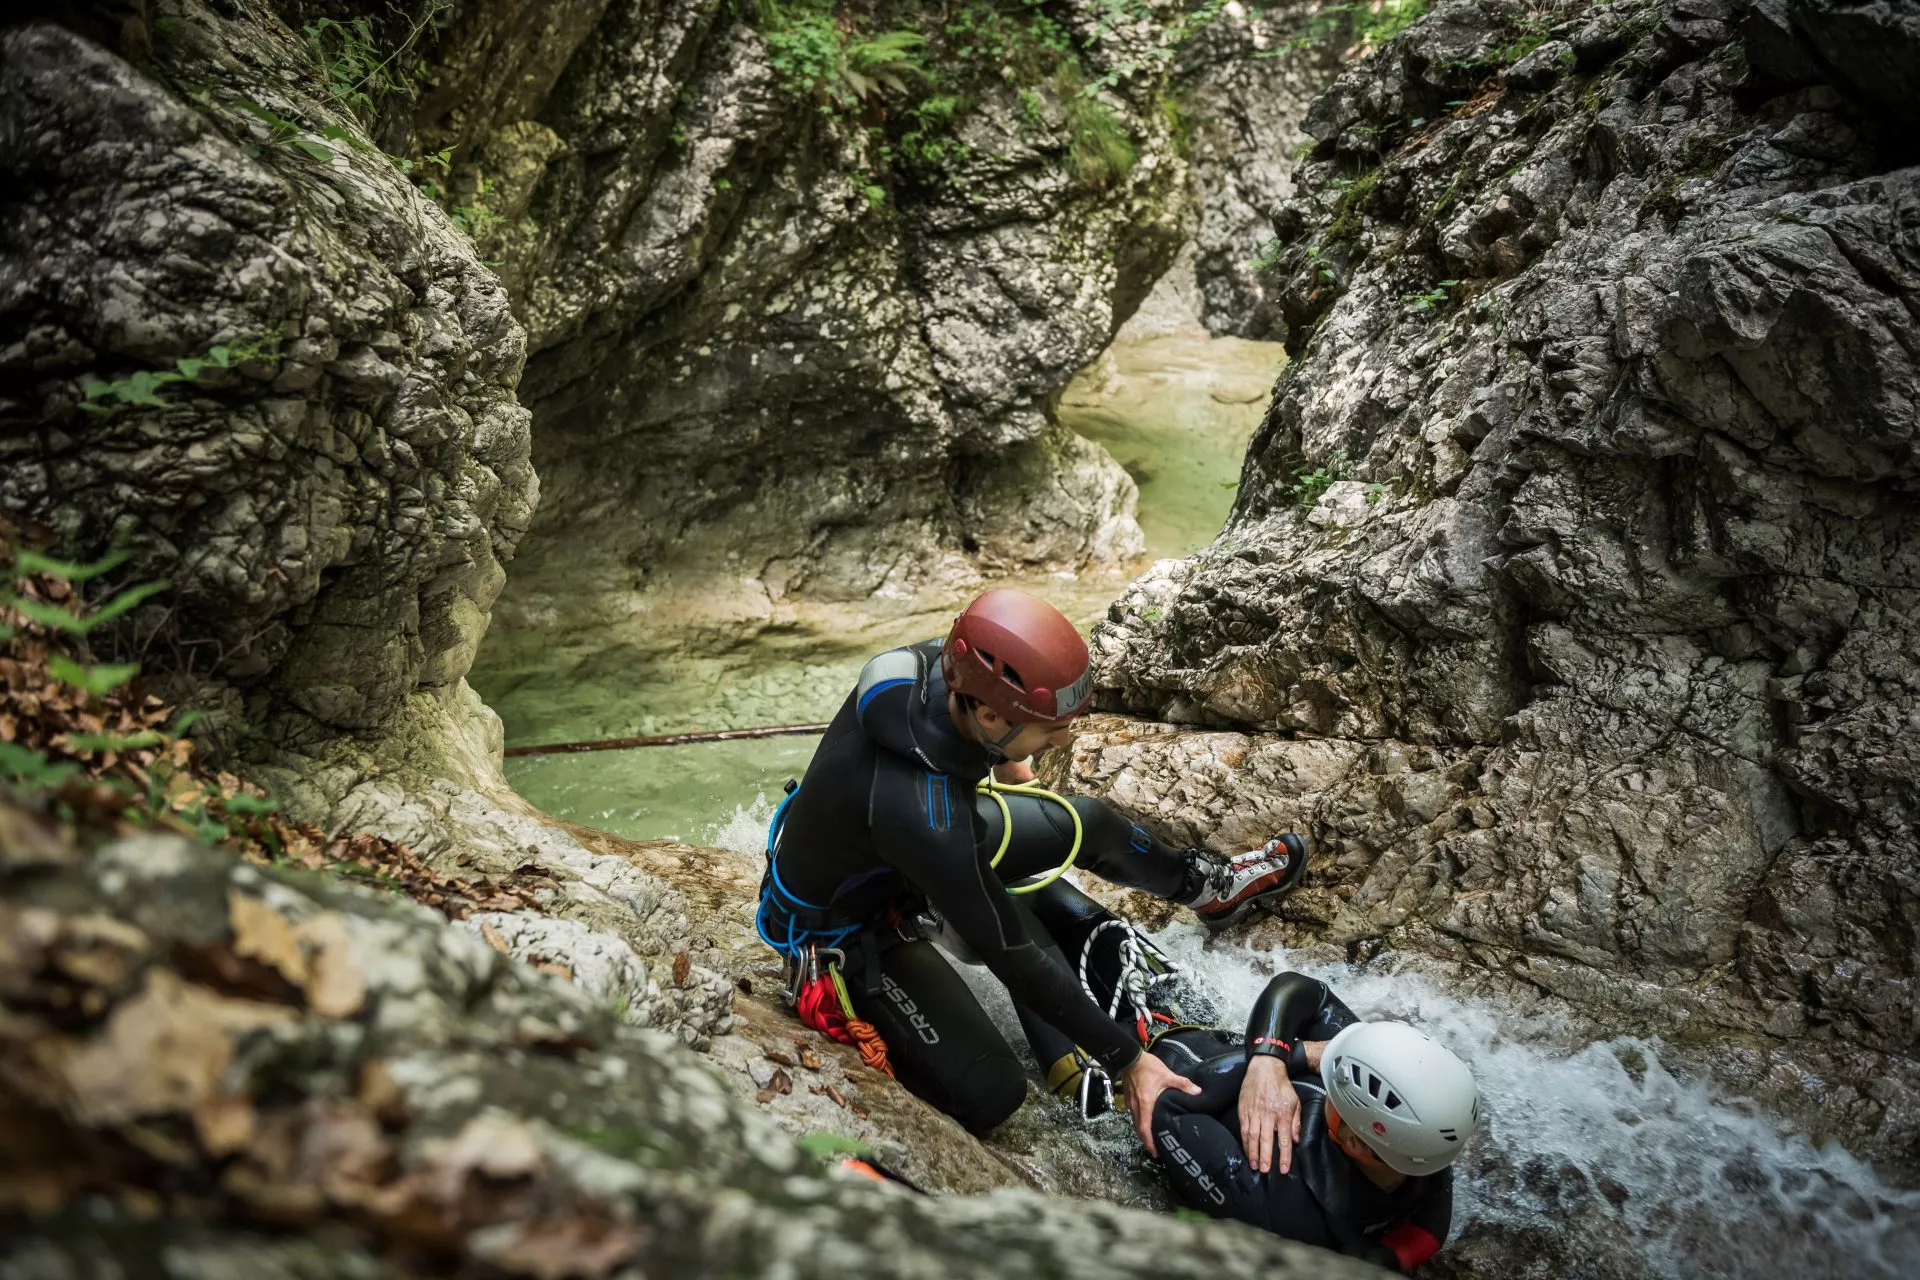 Canyoning with our guide scaled